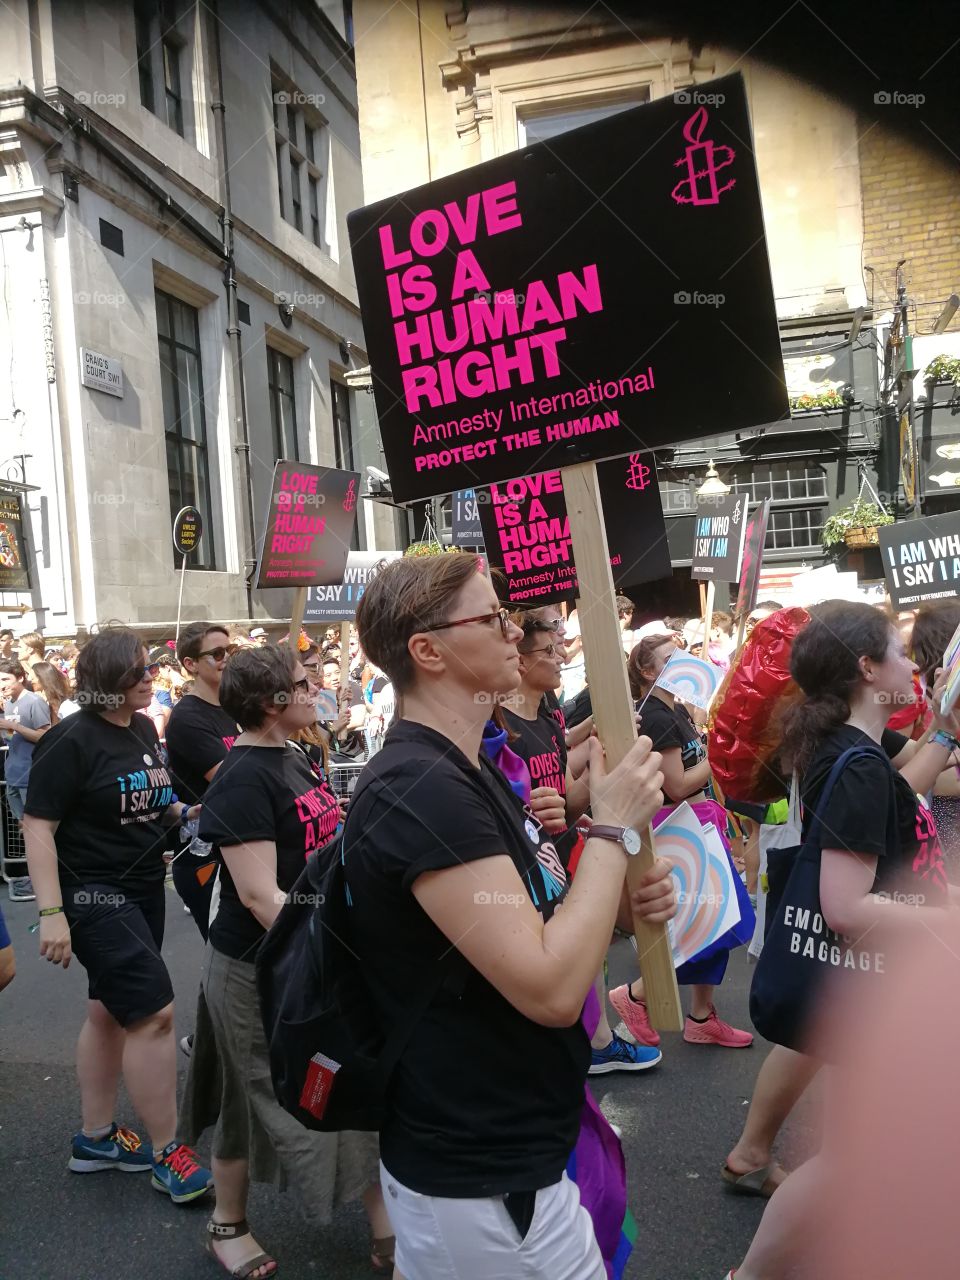 Love is a human right